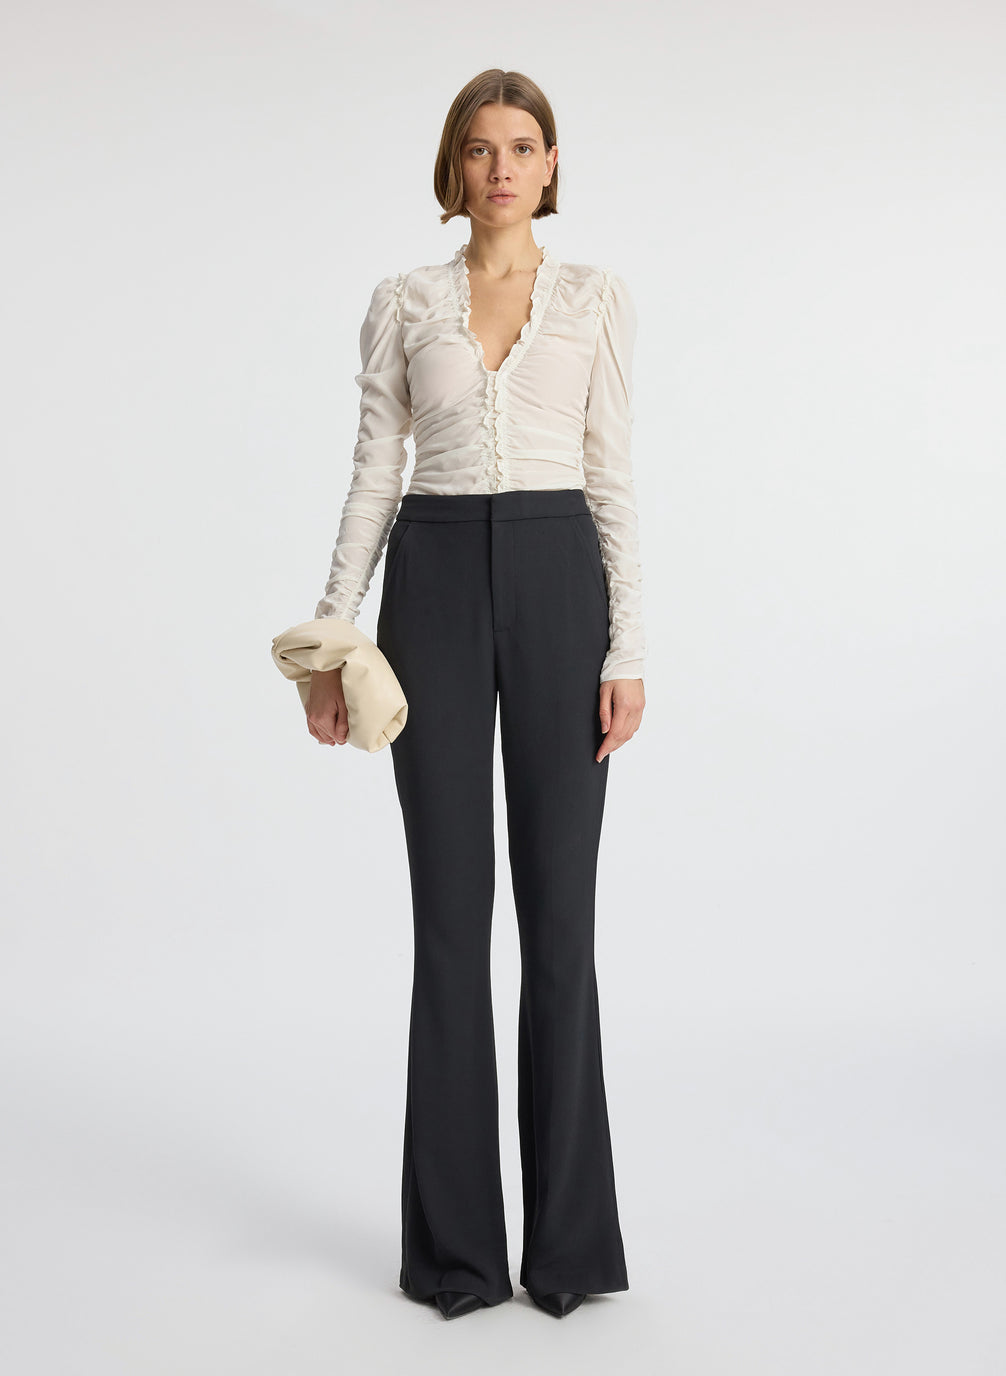 front view of woman wearing white long sleeve v neck top and black flared pants